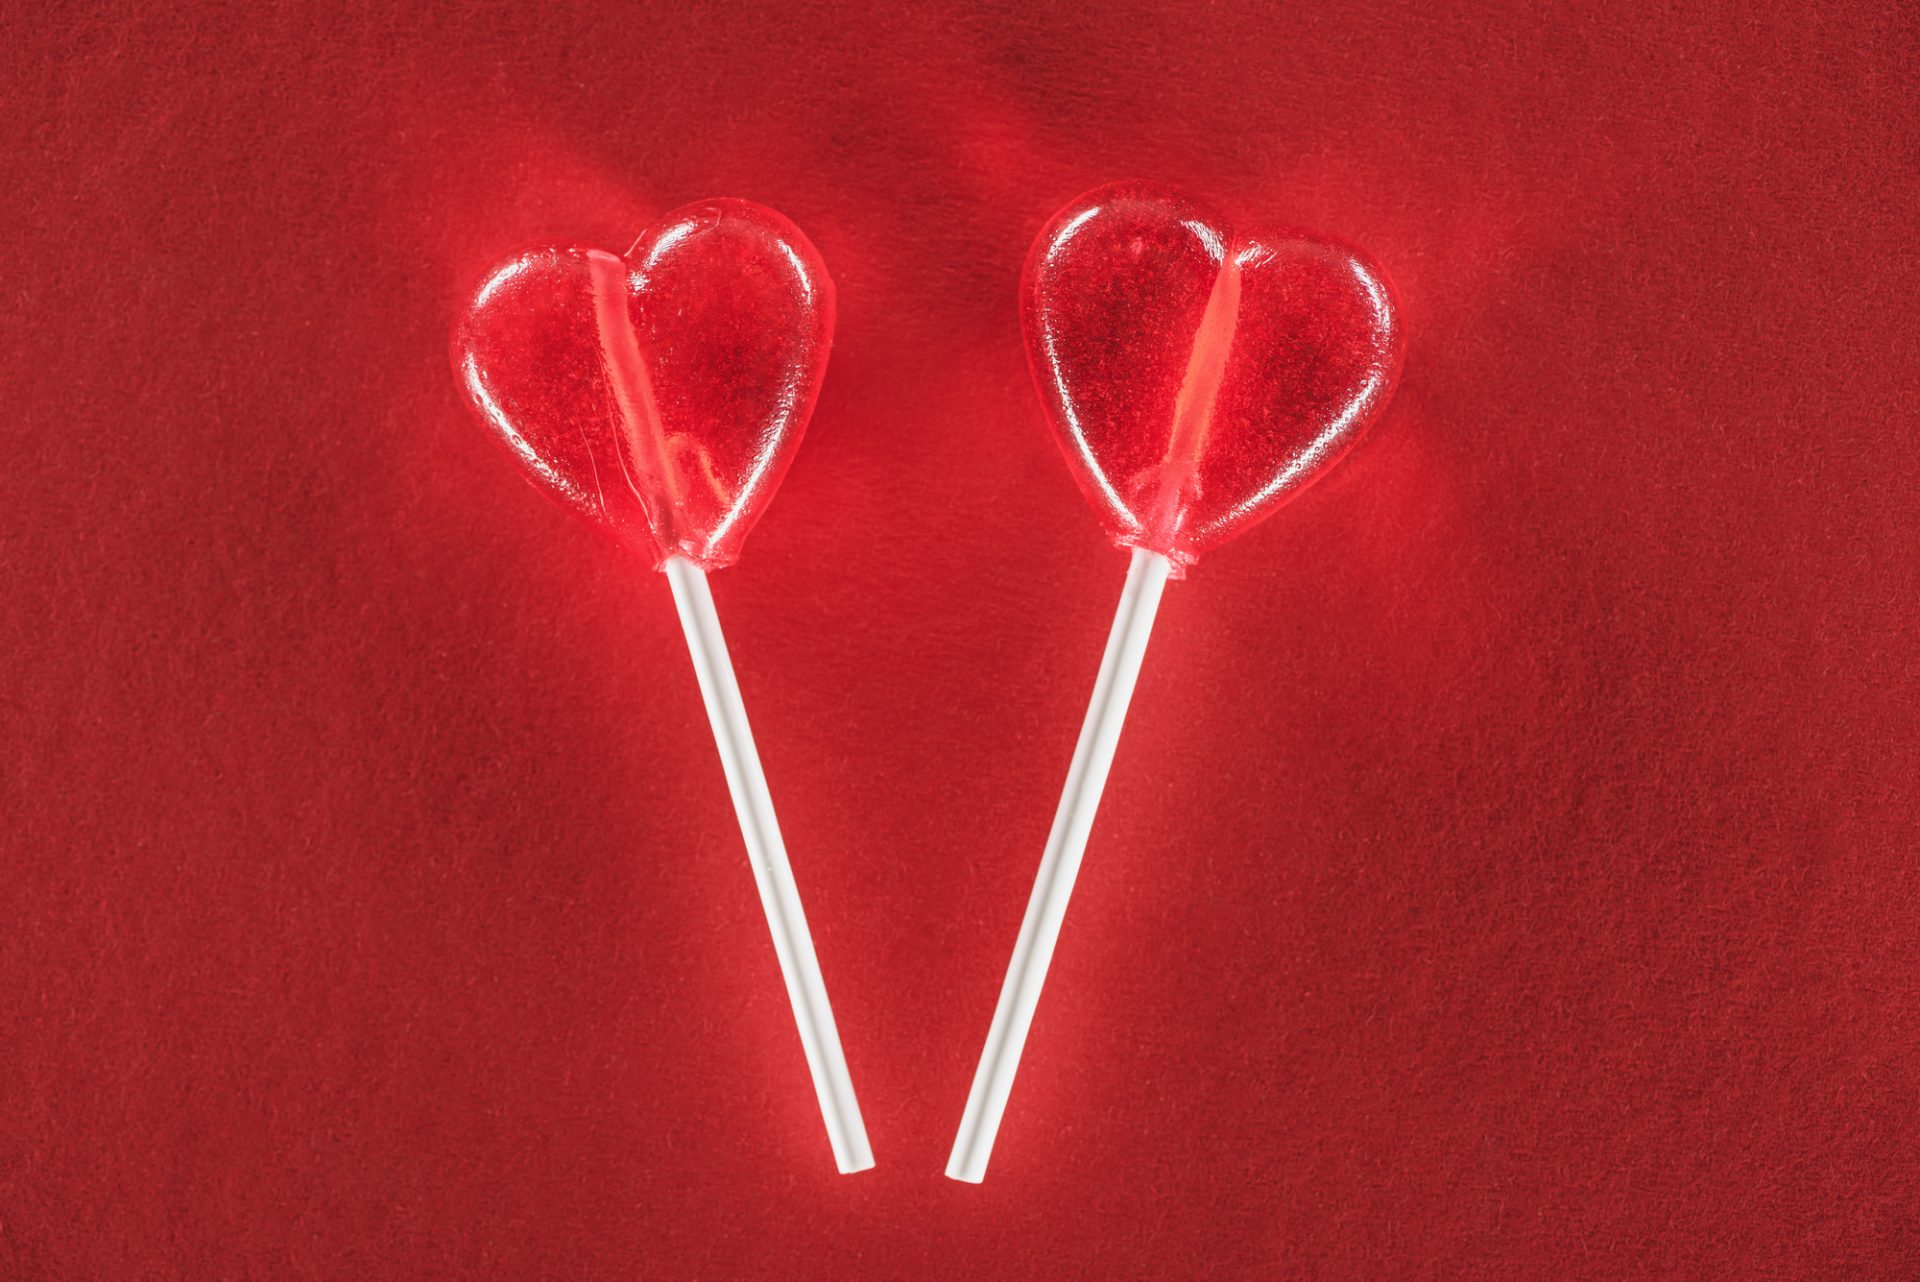 cannabis infused heart shaped lollipops